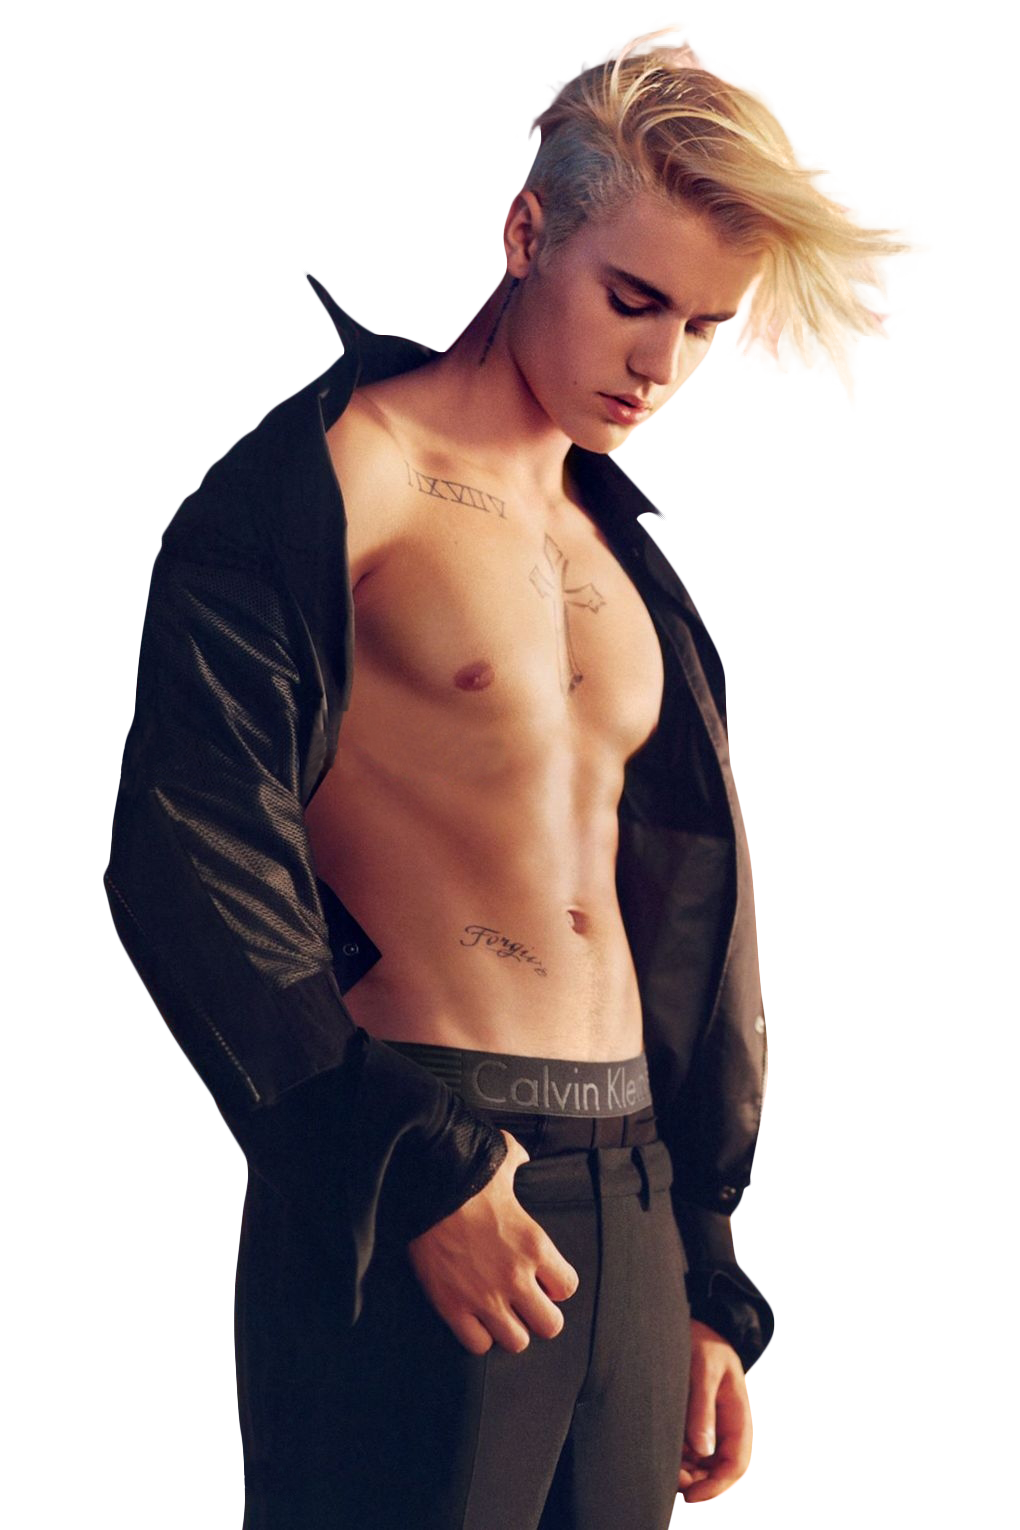 Justin Bieber and Calvin Klein PNG Image